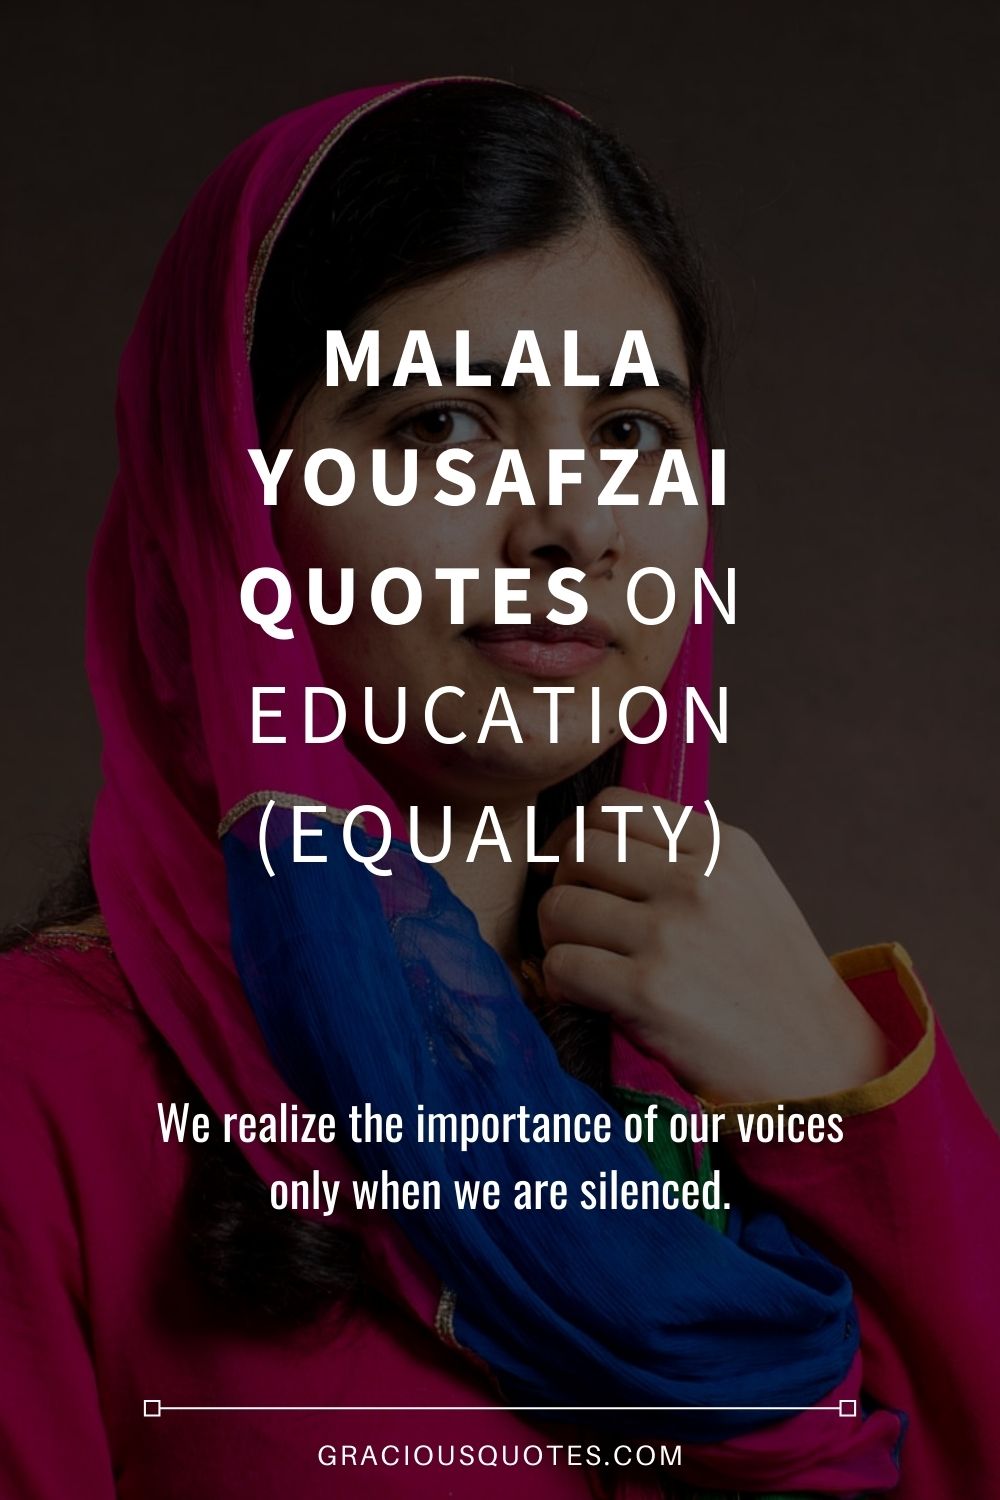 Malala Yousafzai Quotes on Education (EQUALITY) - Gracious Quotes